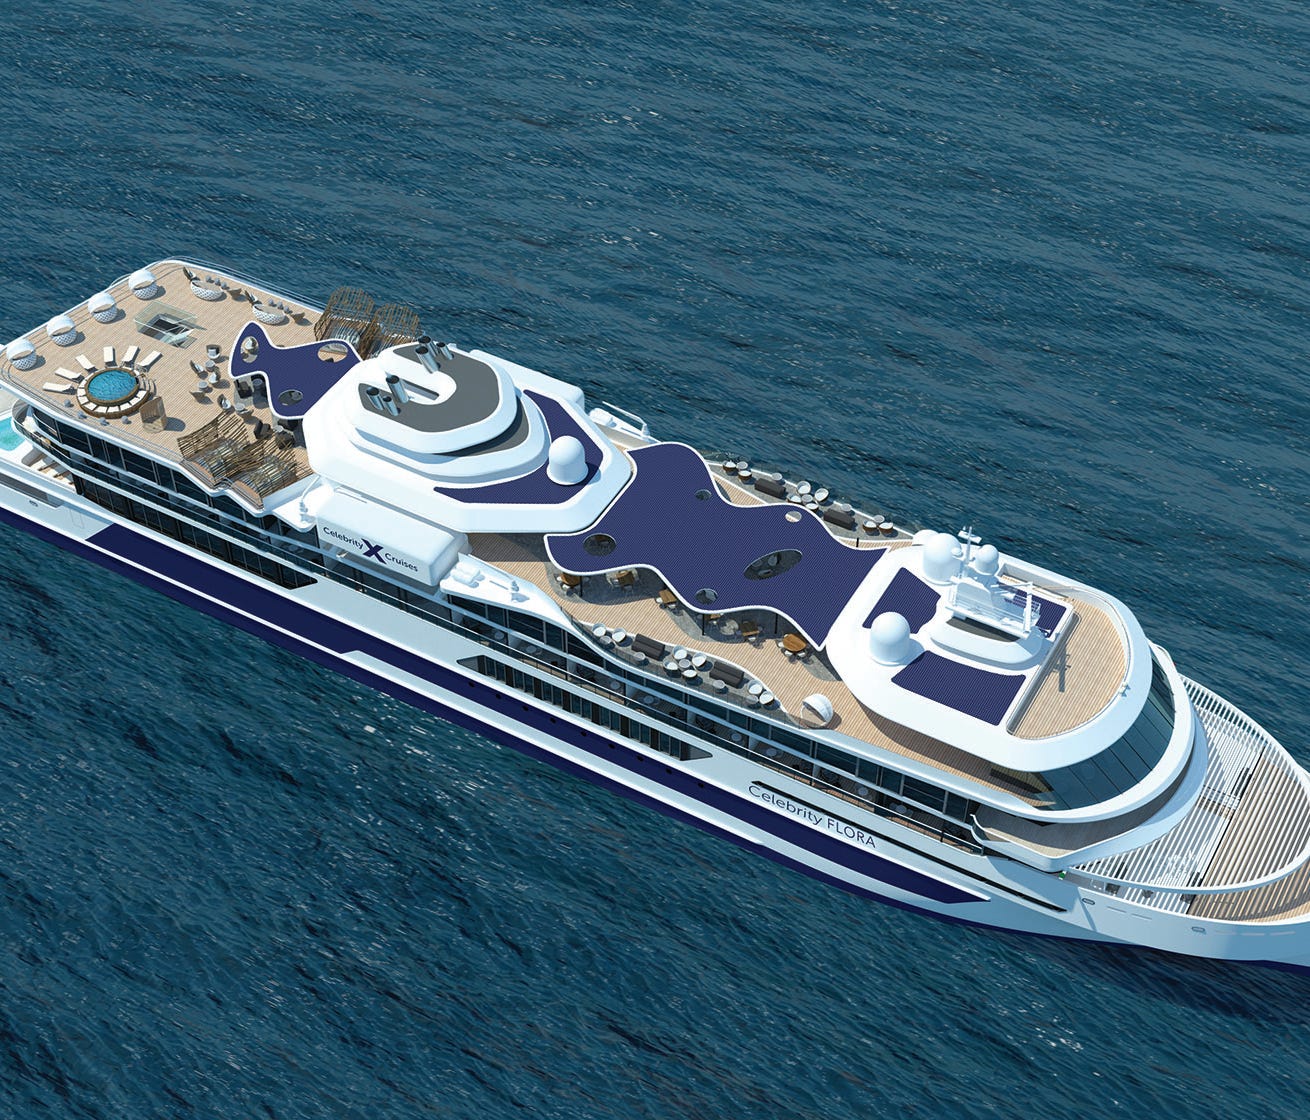 Scheduled to debut in 2019, Celebrity Flora will hold up to 100 passengers and sail year-round in the Galapagos.